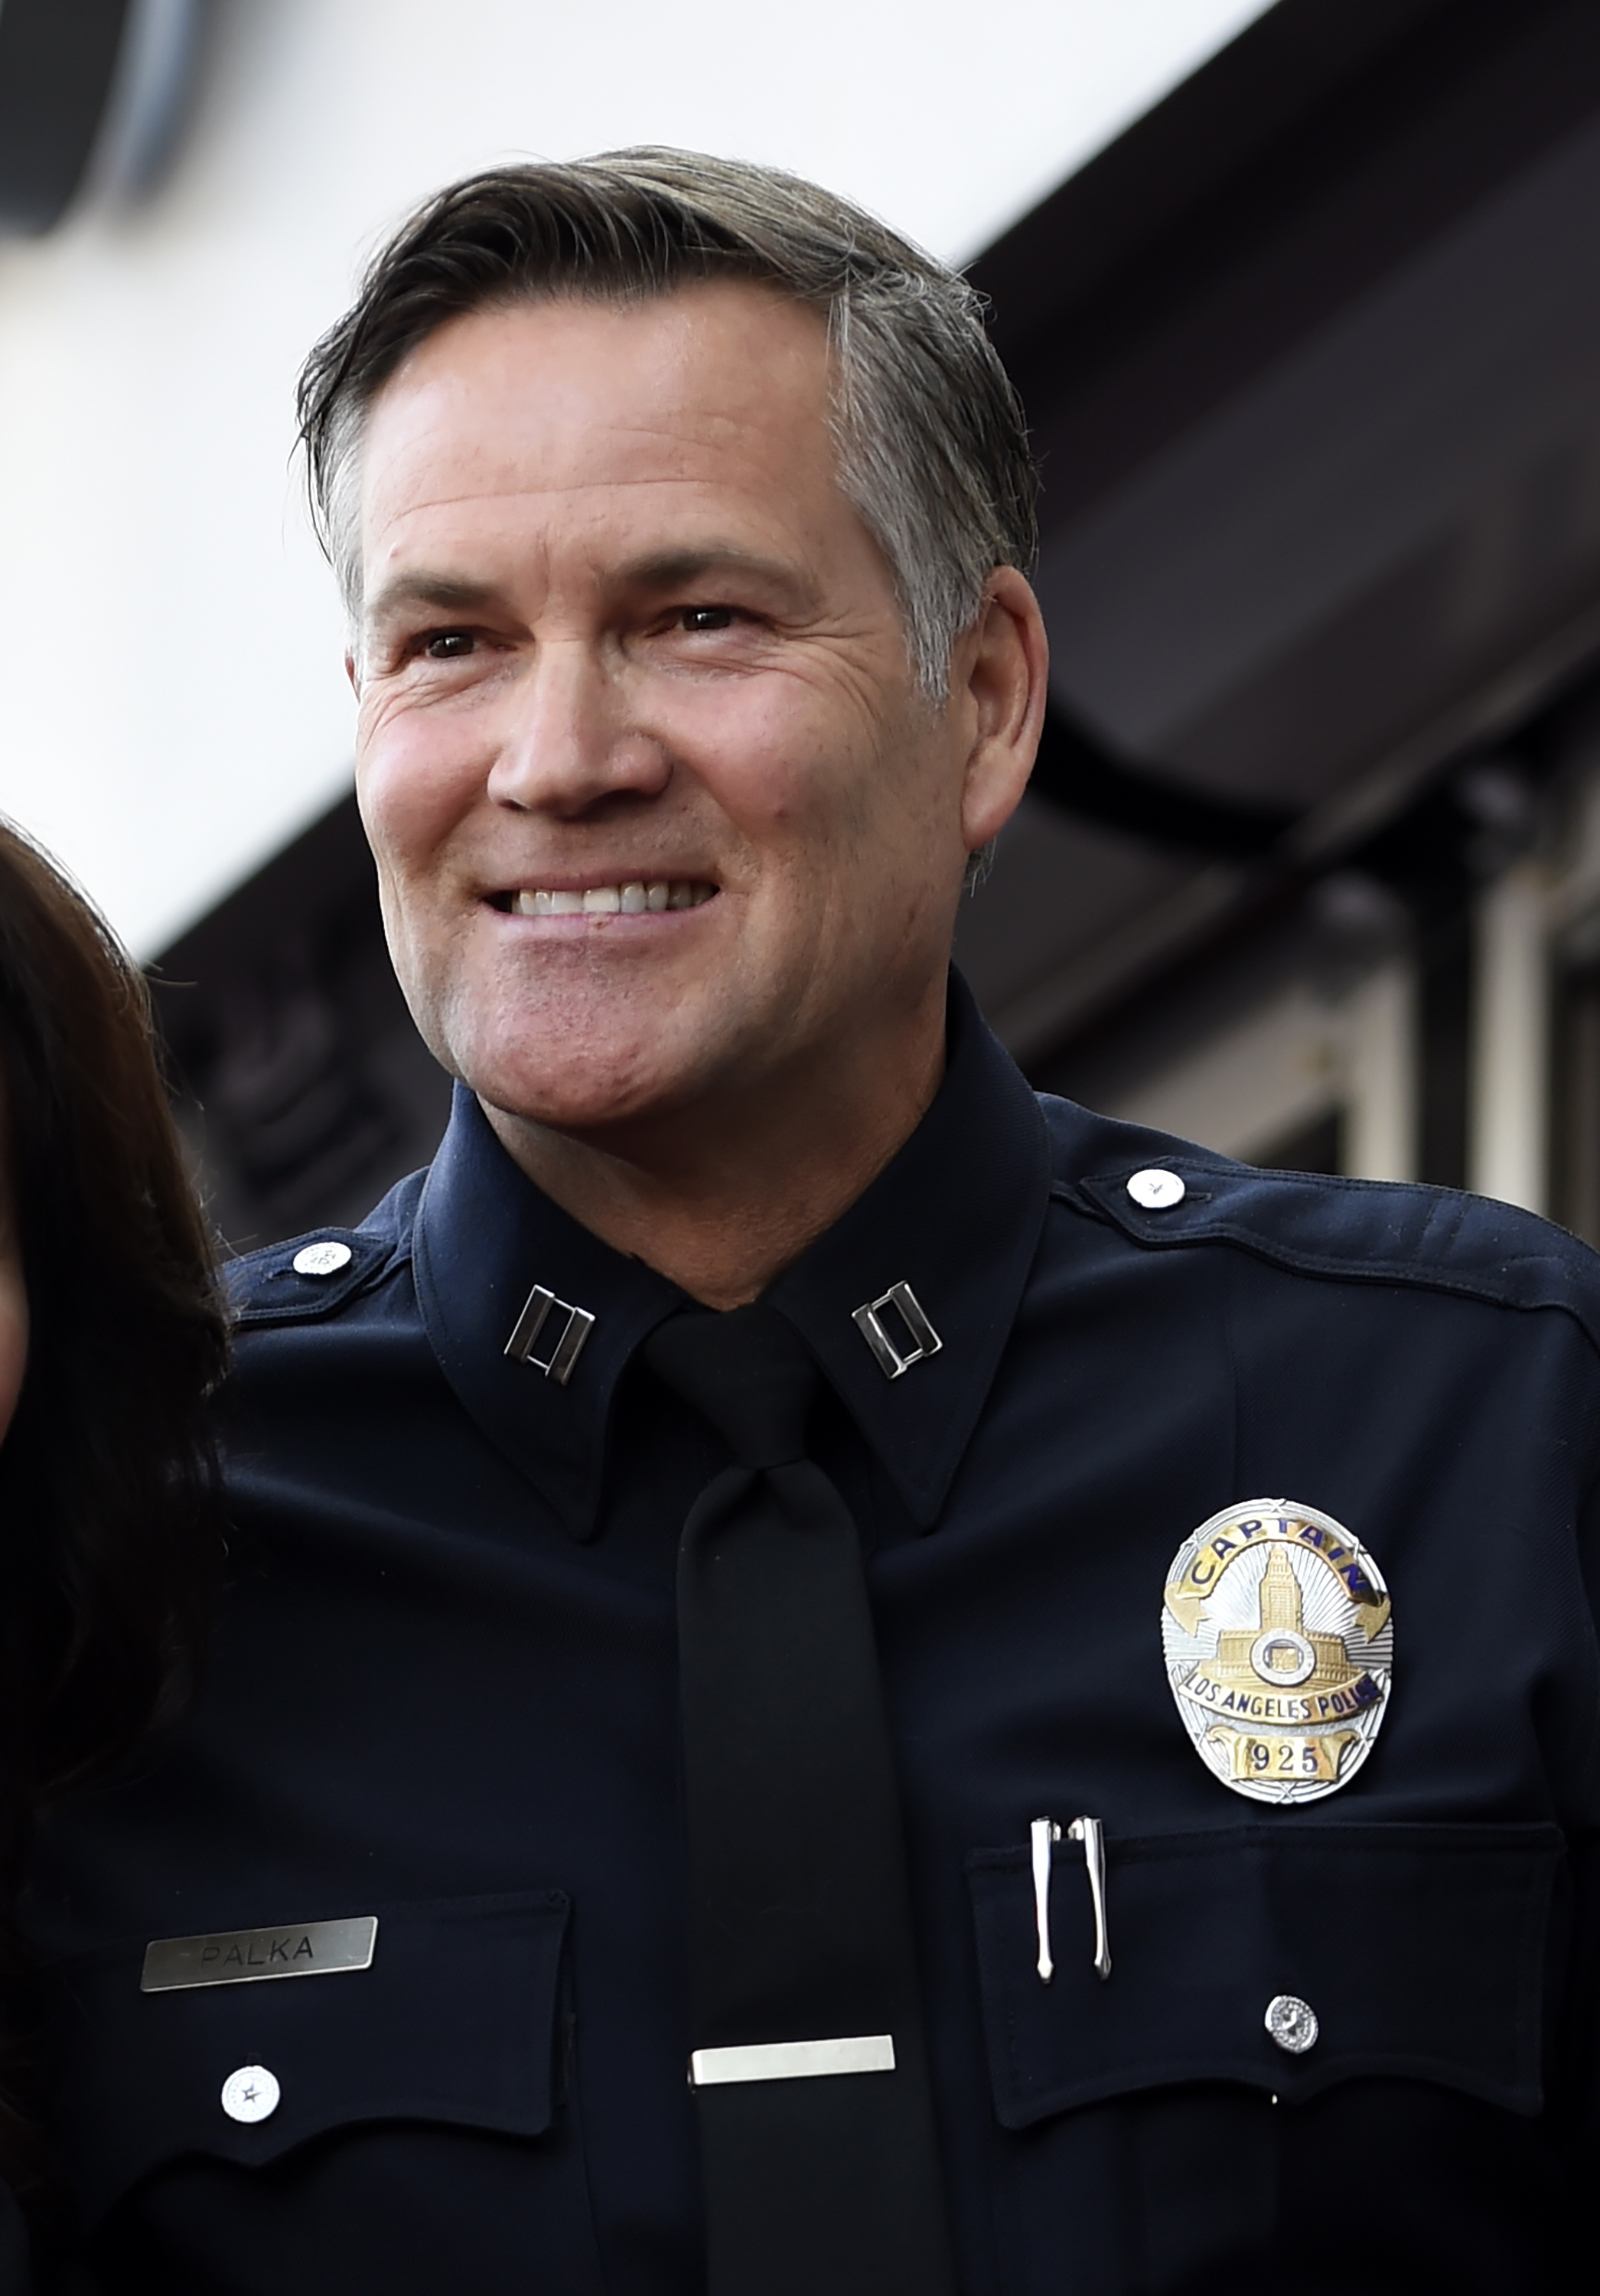 Former LAPD commander shared confidential information with CBS